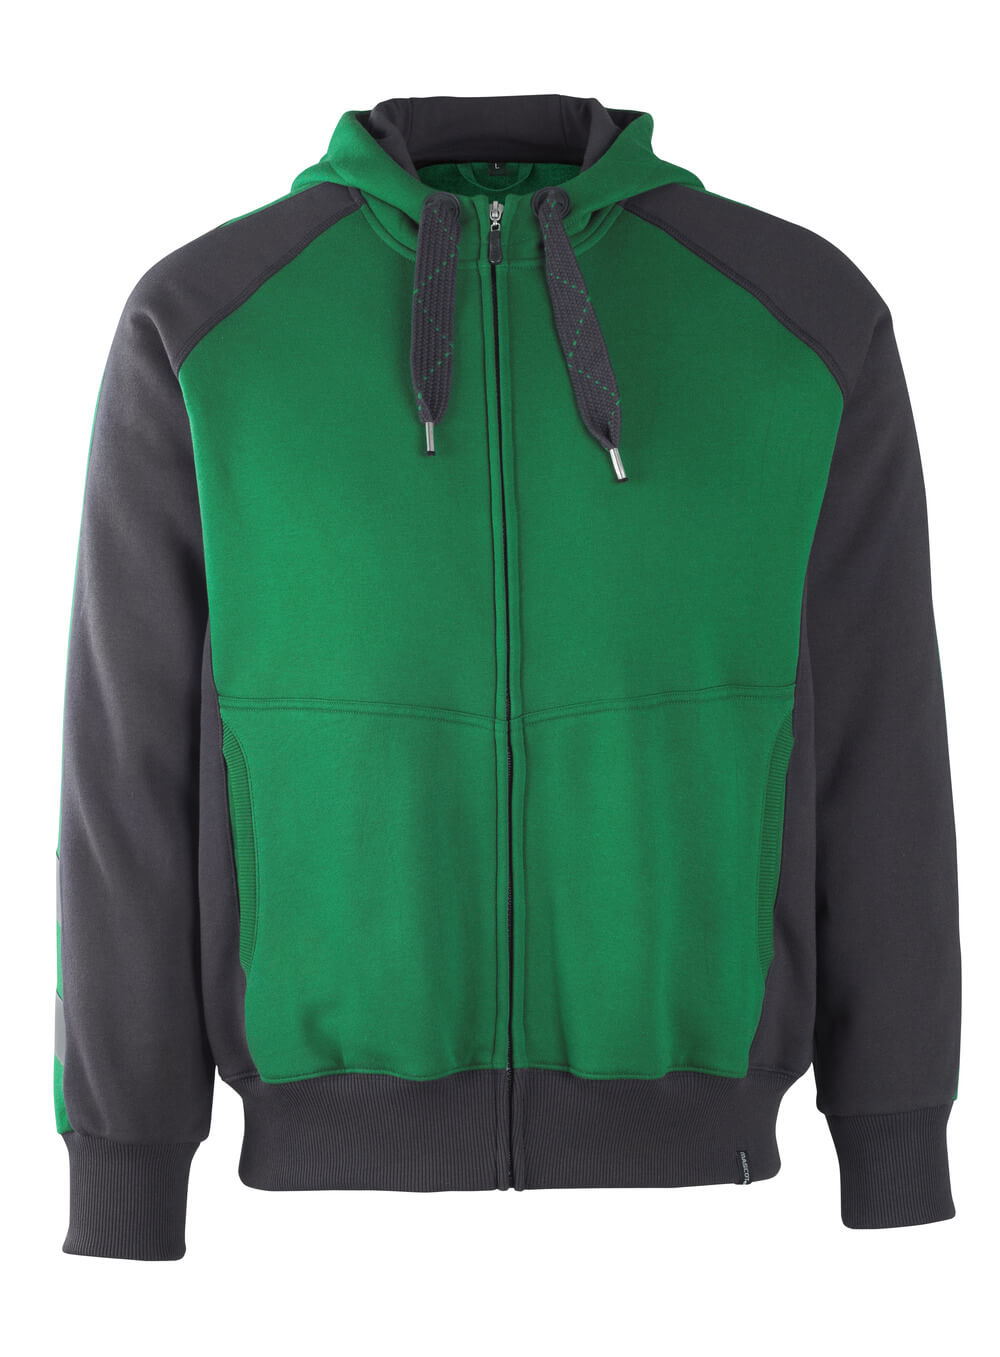 WIESBADAND HOODED SWEATER, GREEN/BLACK, 60% COTTON/40% POLYESTER, MASCOT UNIQUE